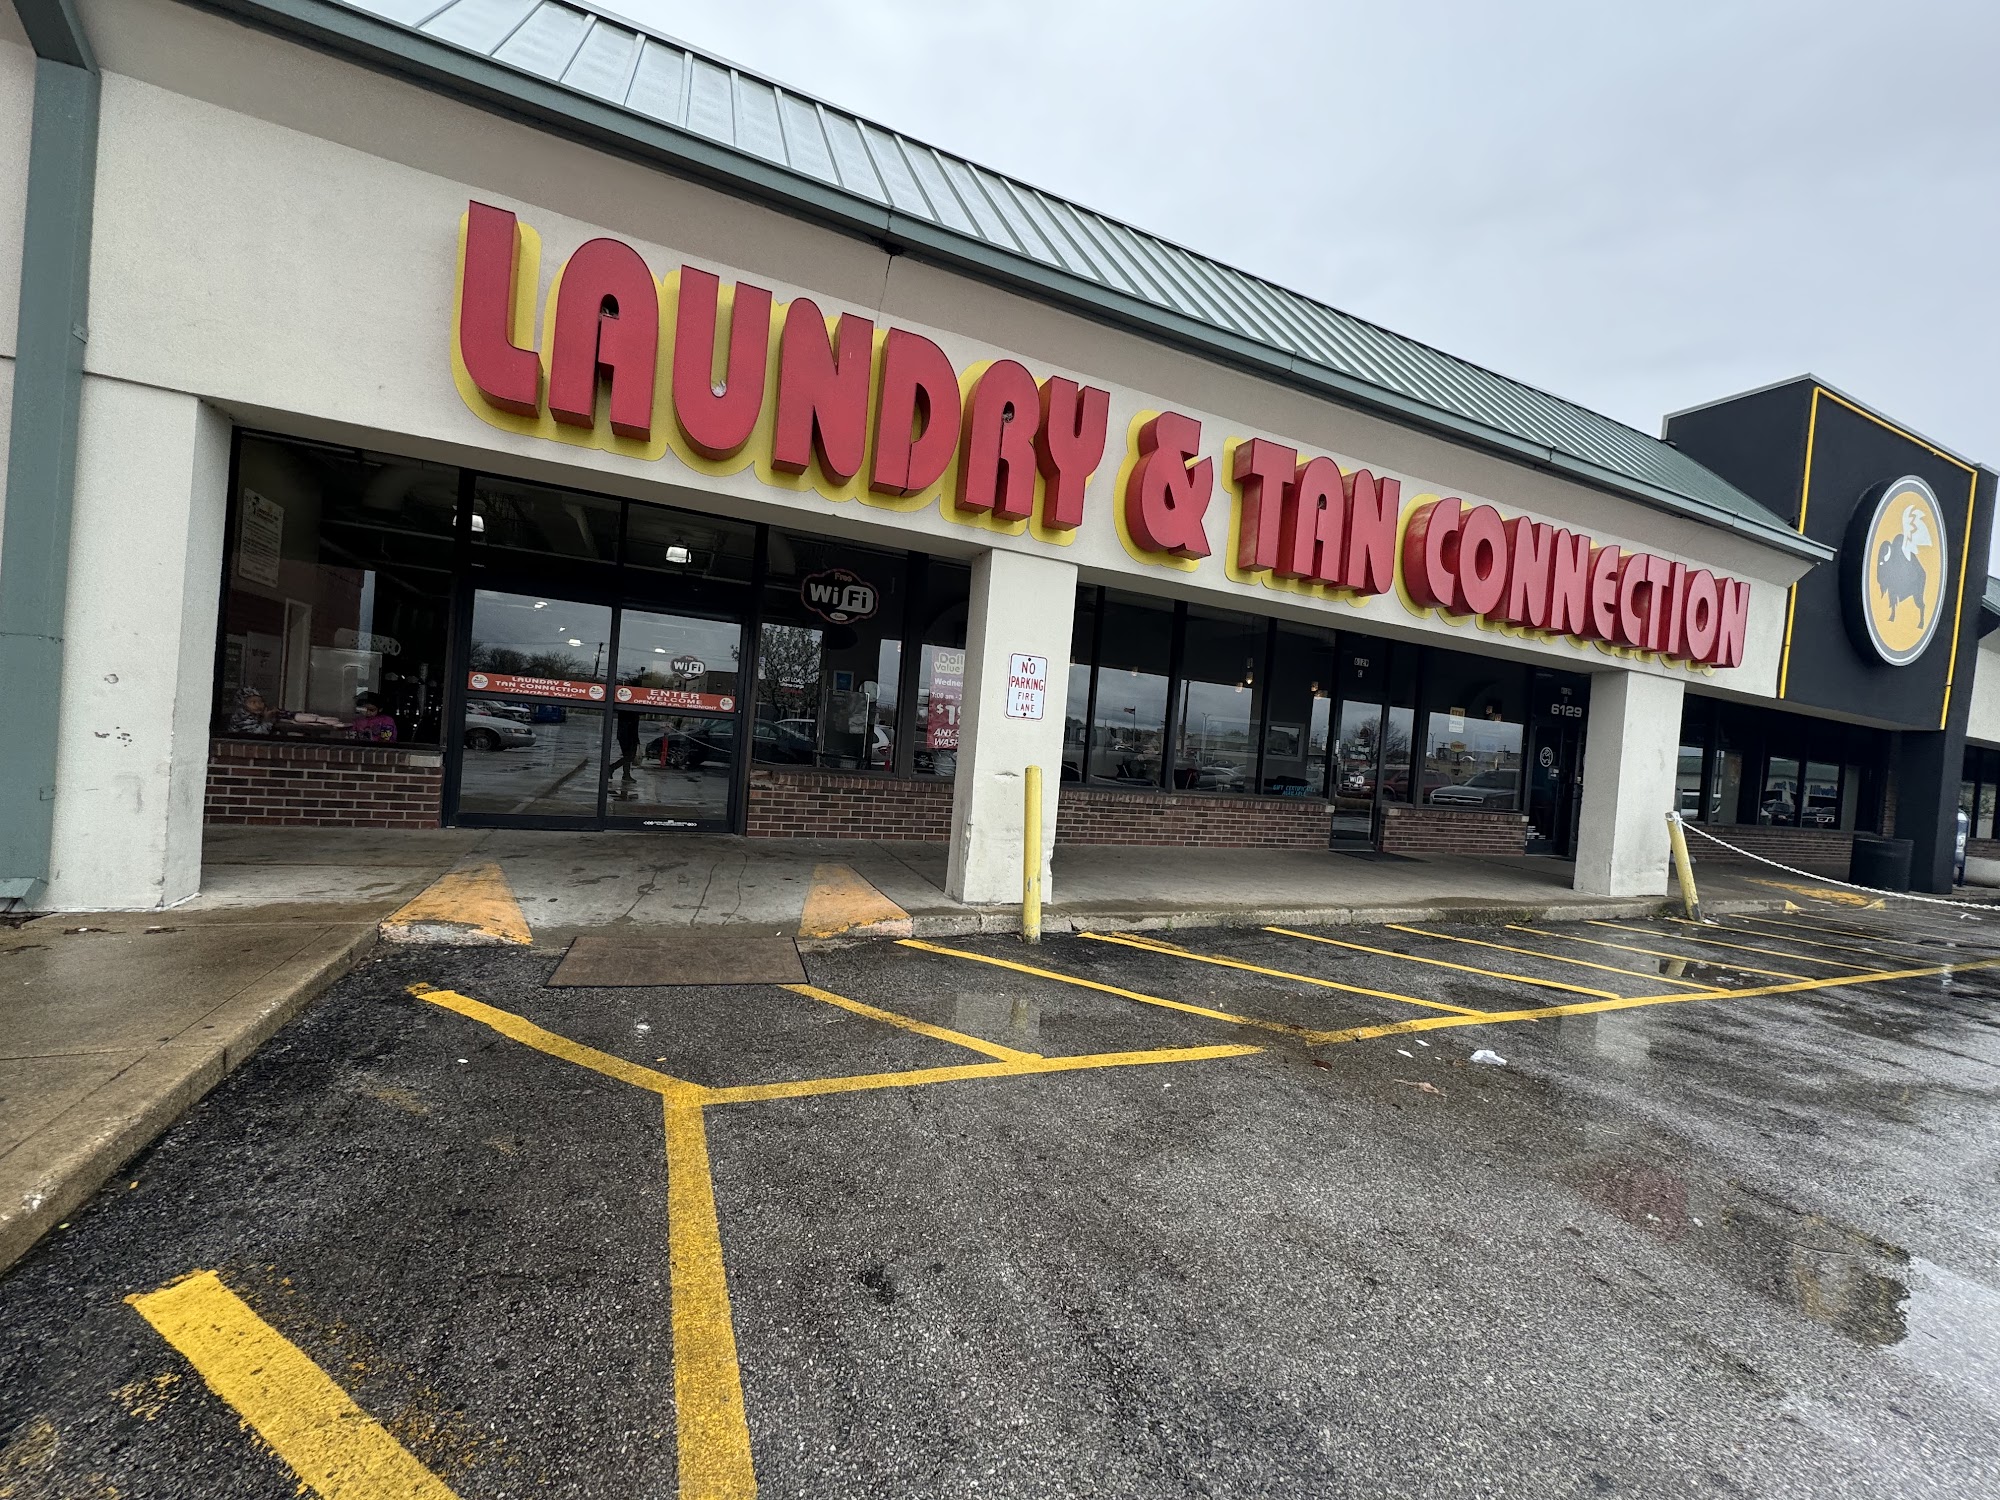 Laundry & Tan Connection